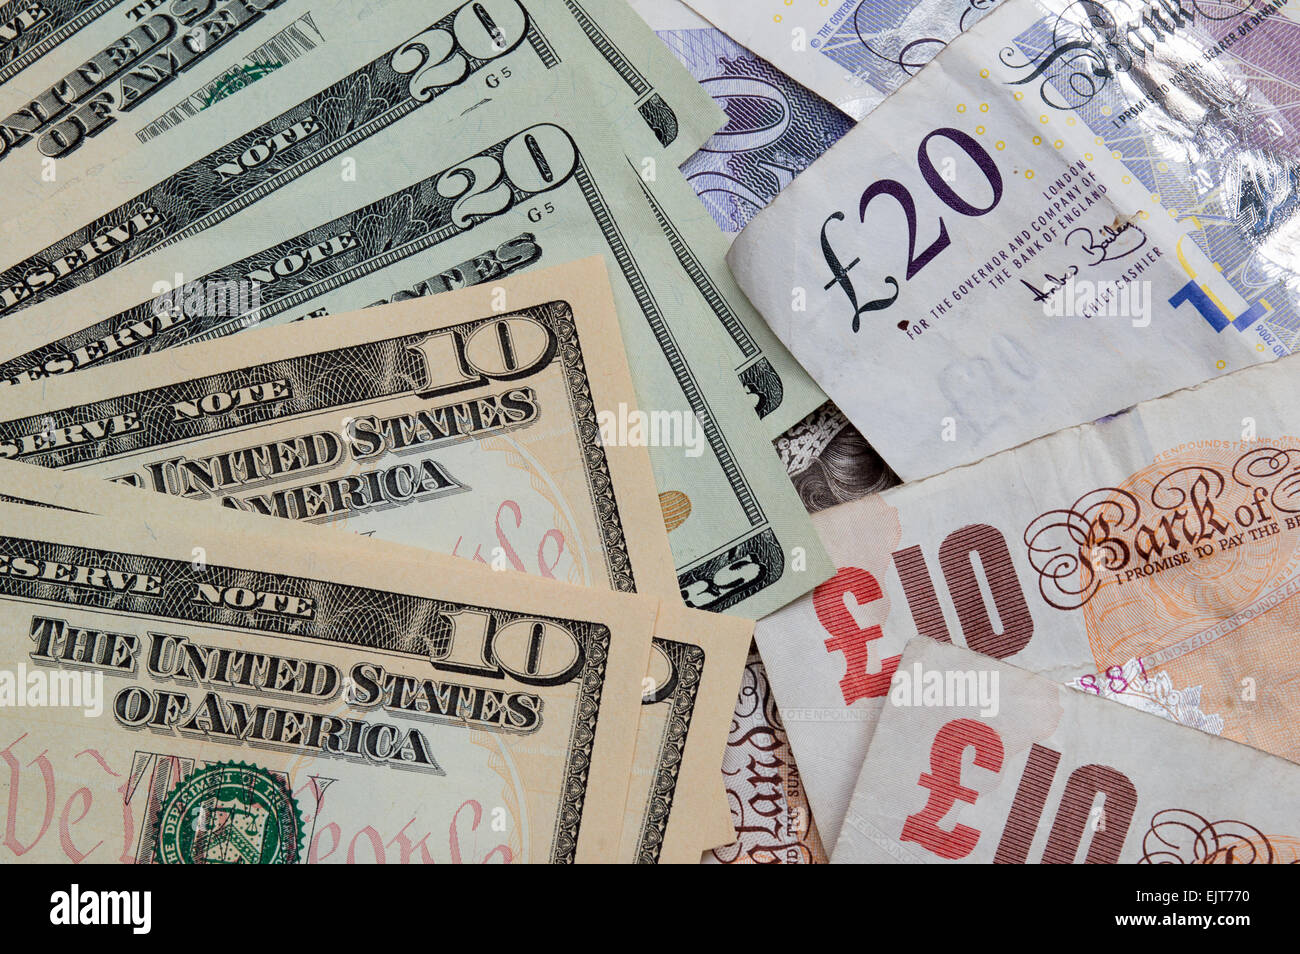 USA and UK Currency Stock Photo